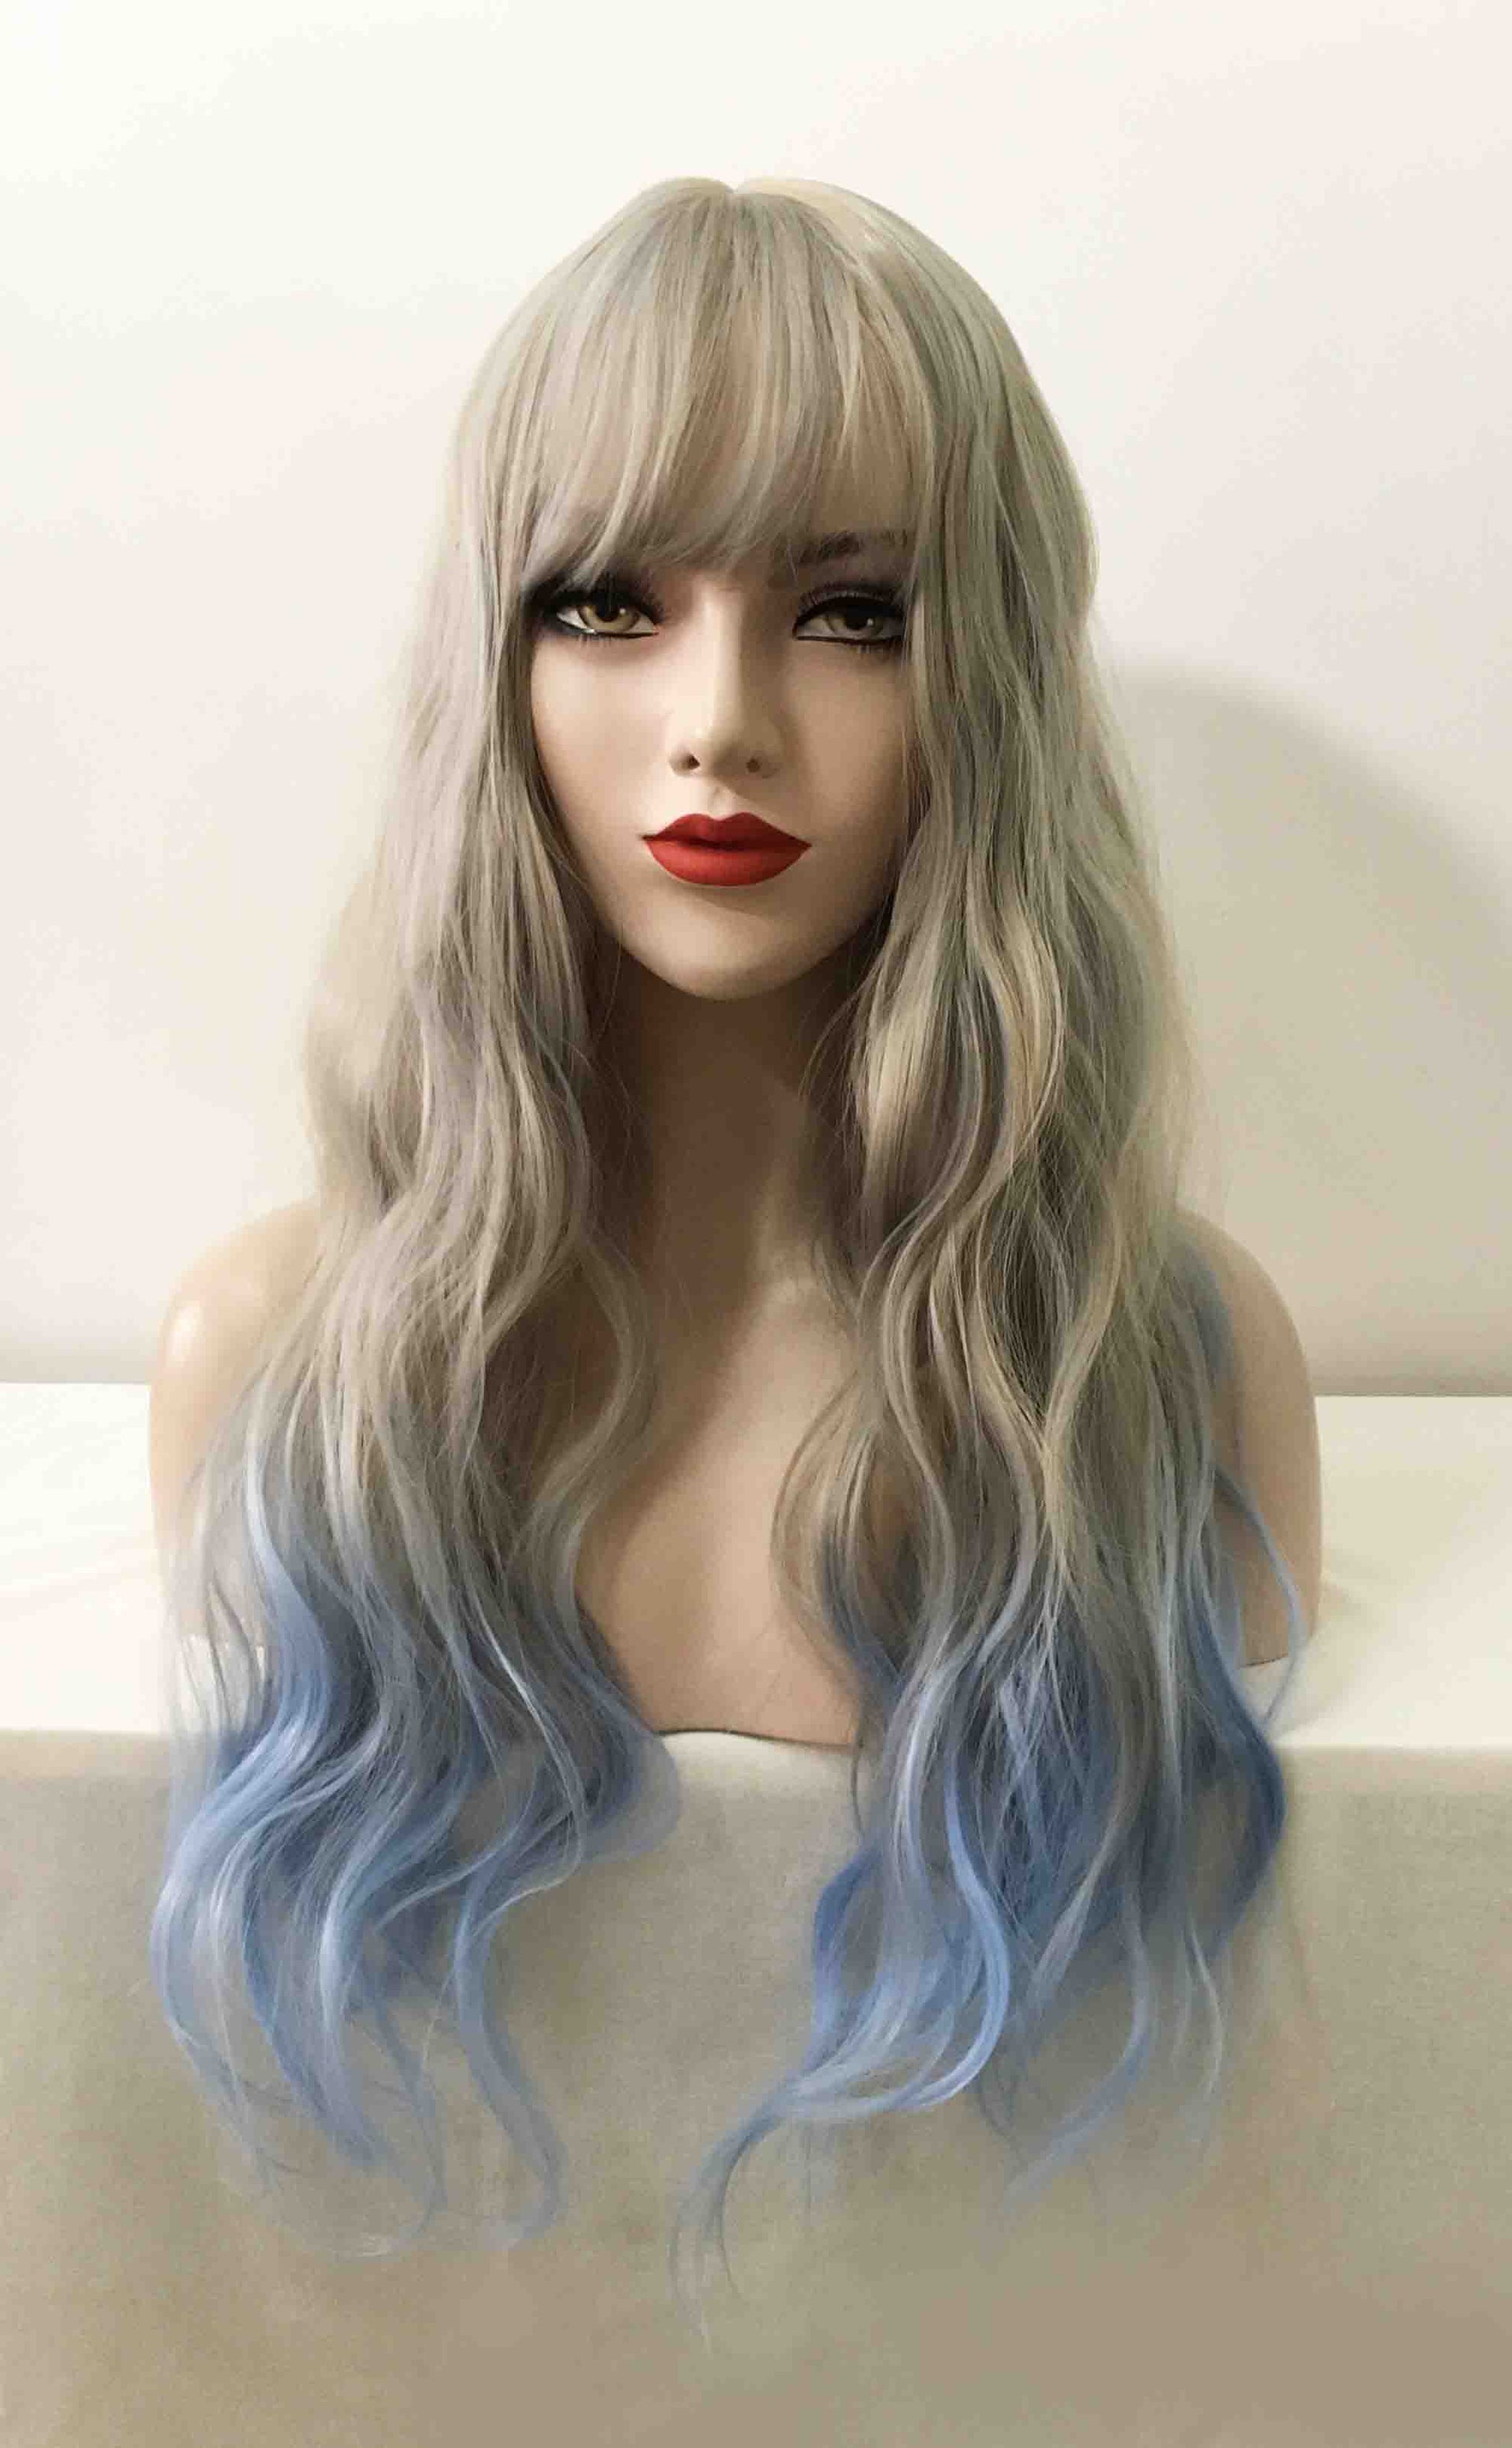 nevermindyrhead Women Grey Ombre Blue Long Curly Fringe Bangs Wig